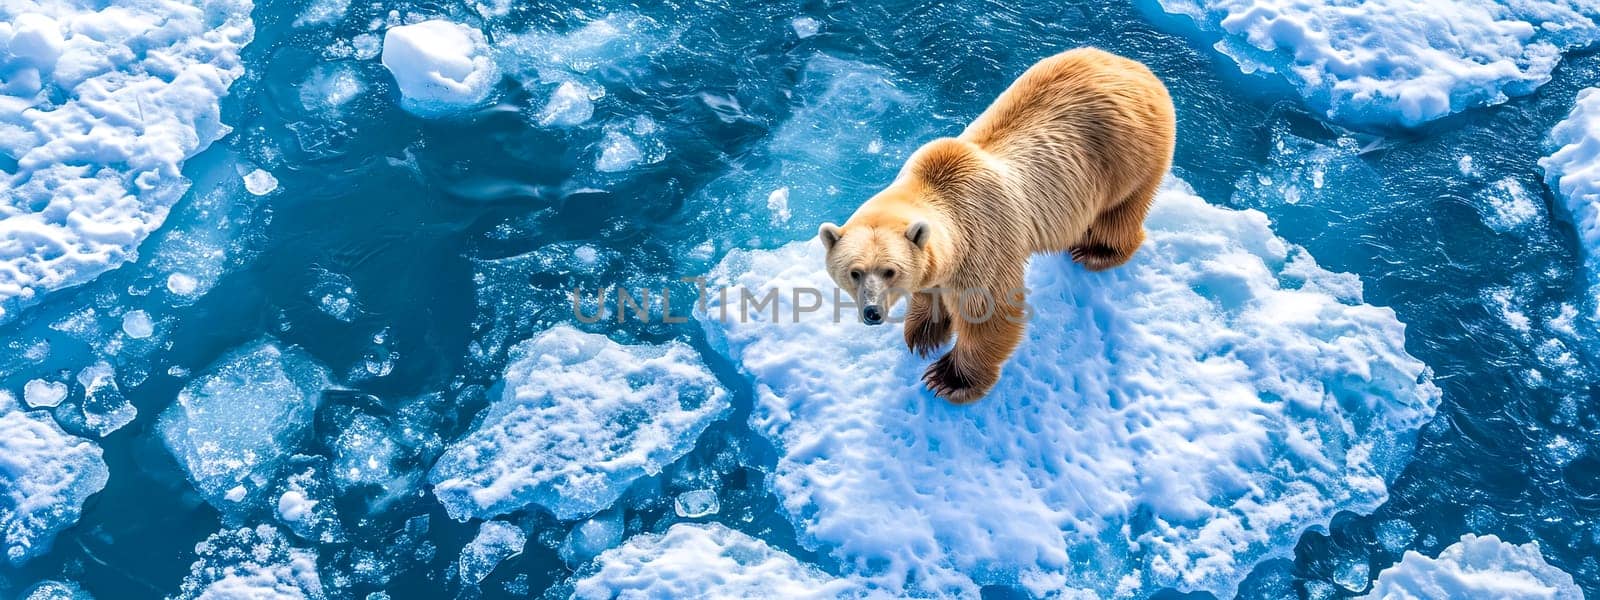 An aerial perspective showcases a lone bear navigating the icy terrain of a glacier, highlighting the stark beauty and isolation of the Arctic environment